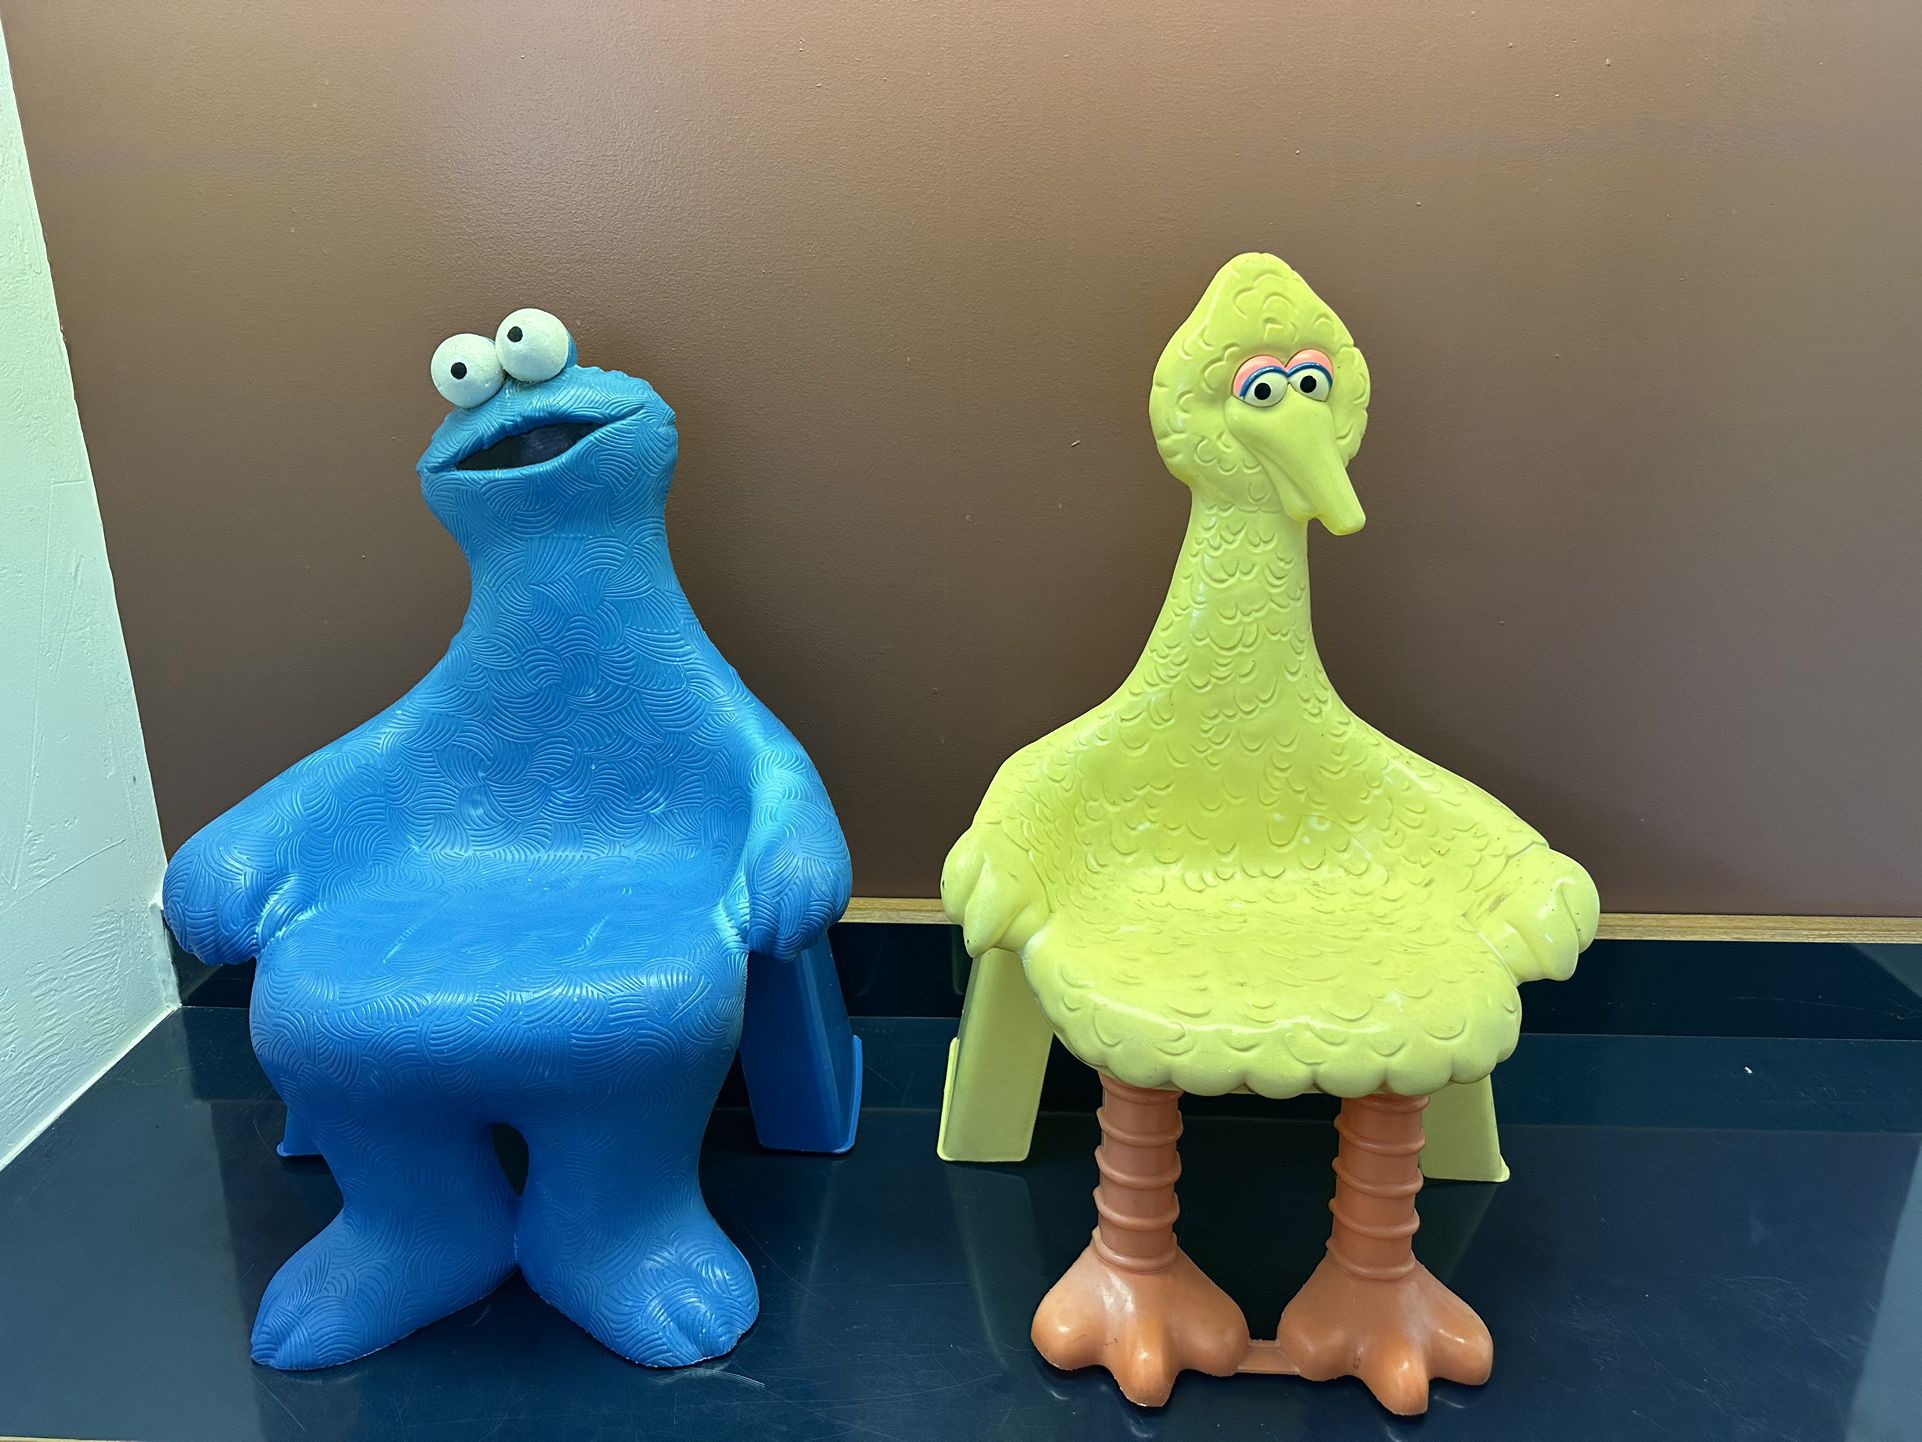 Vintage 1984 Cookie Monster And Big Bird Chairs